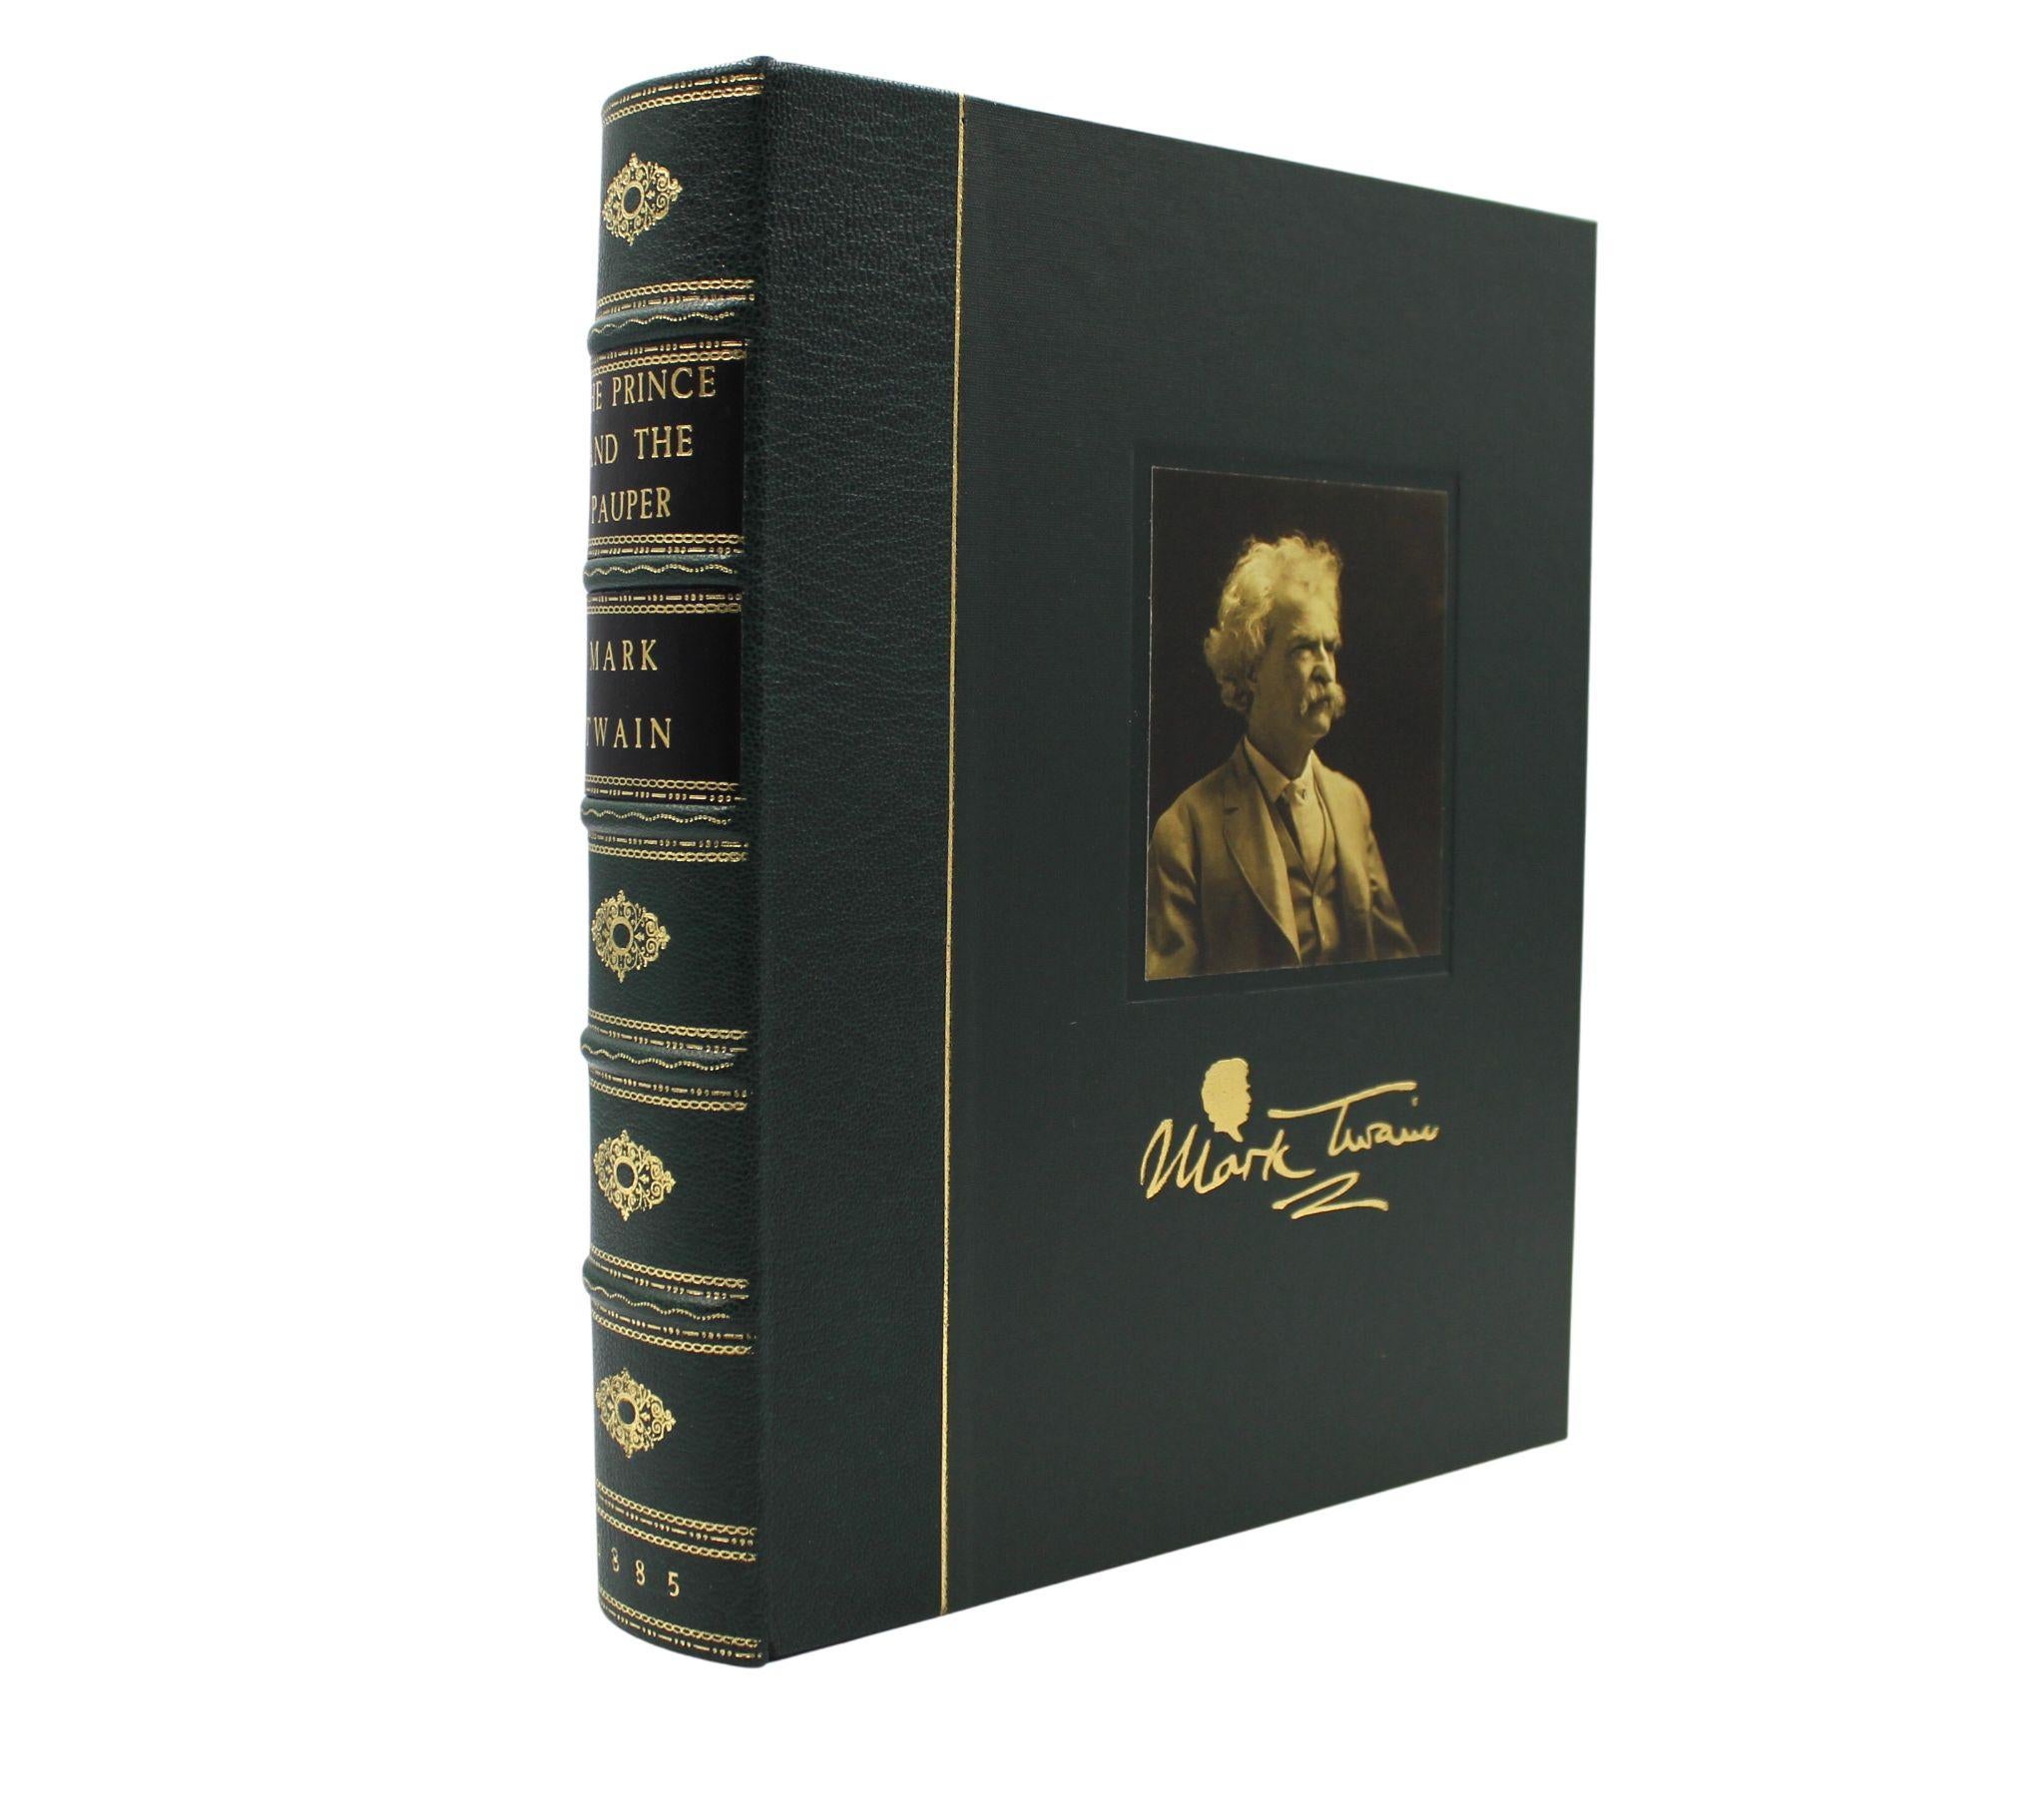 Twain, Mark. The Prince and the Pauper: A Tale for Young People of All Ages. New York: Charles L. Webster and Co., 1885. Later edition. Octavo. In publisher’s green cloth bindings with gilt and black pictorial embossing to boards. Presented with a